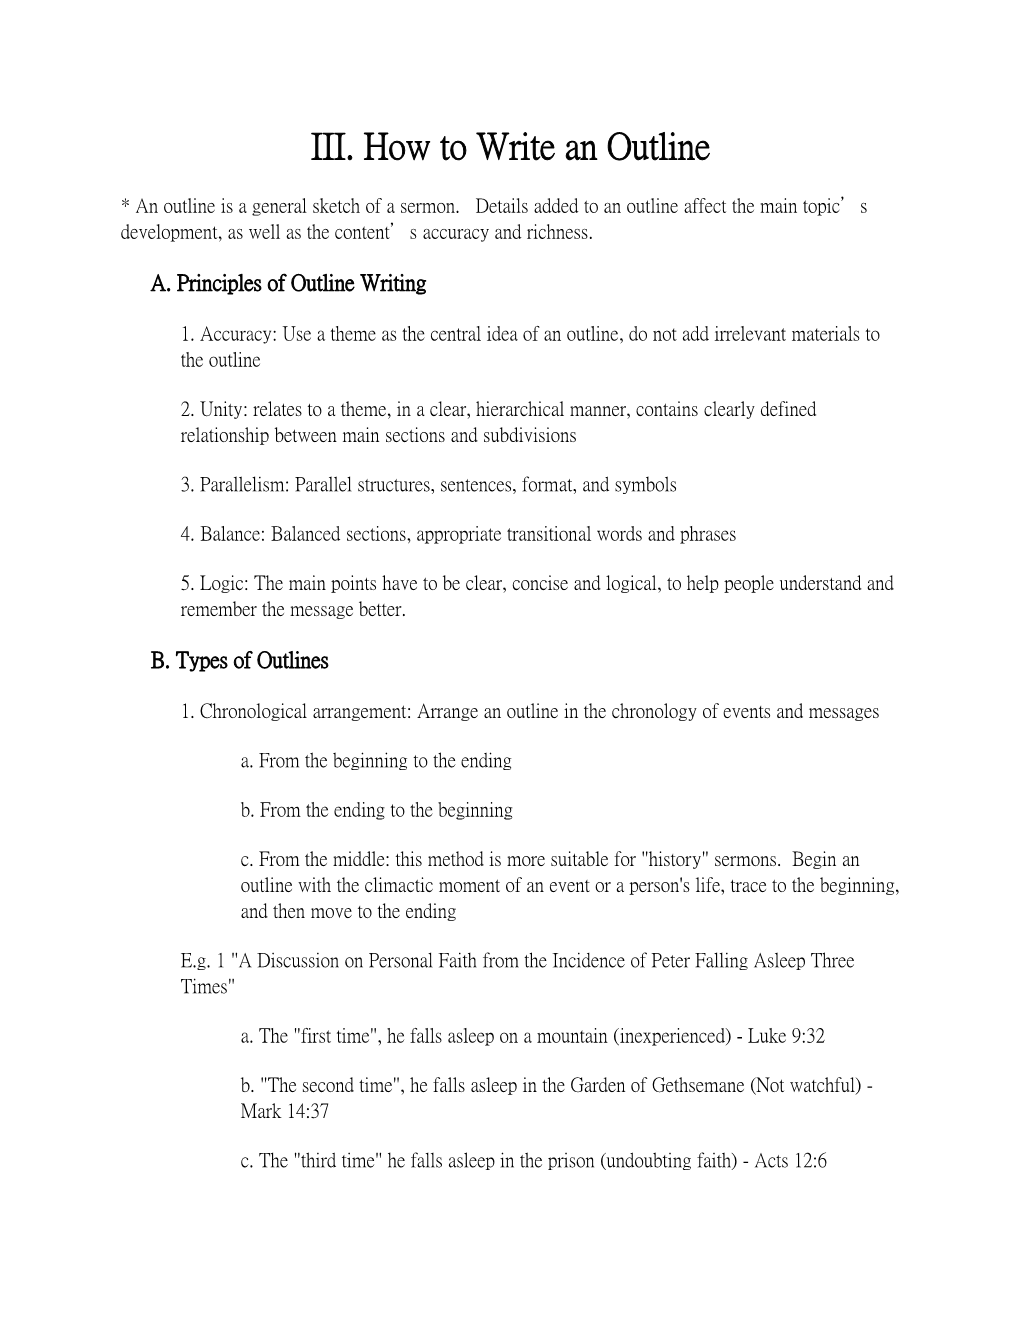 III. How to Writean Outline